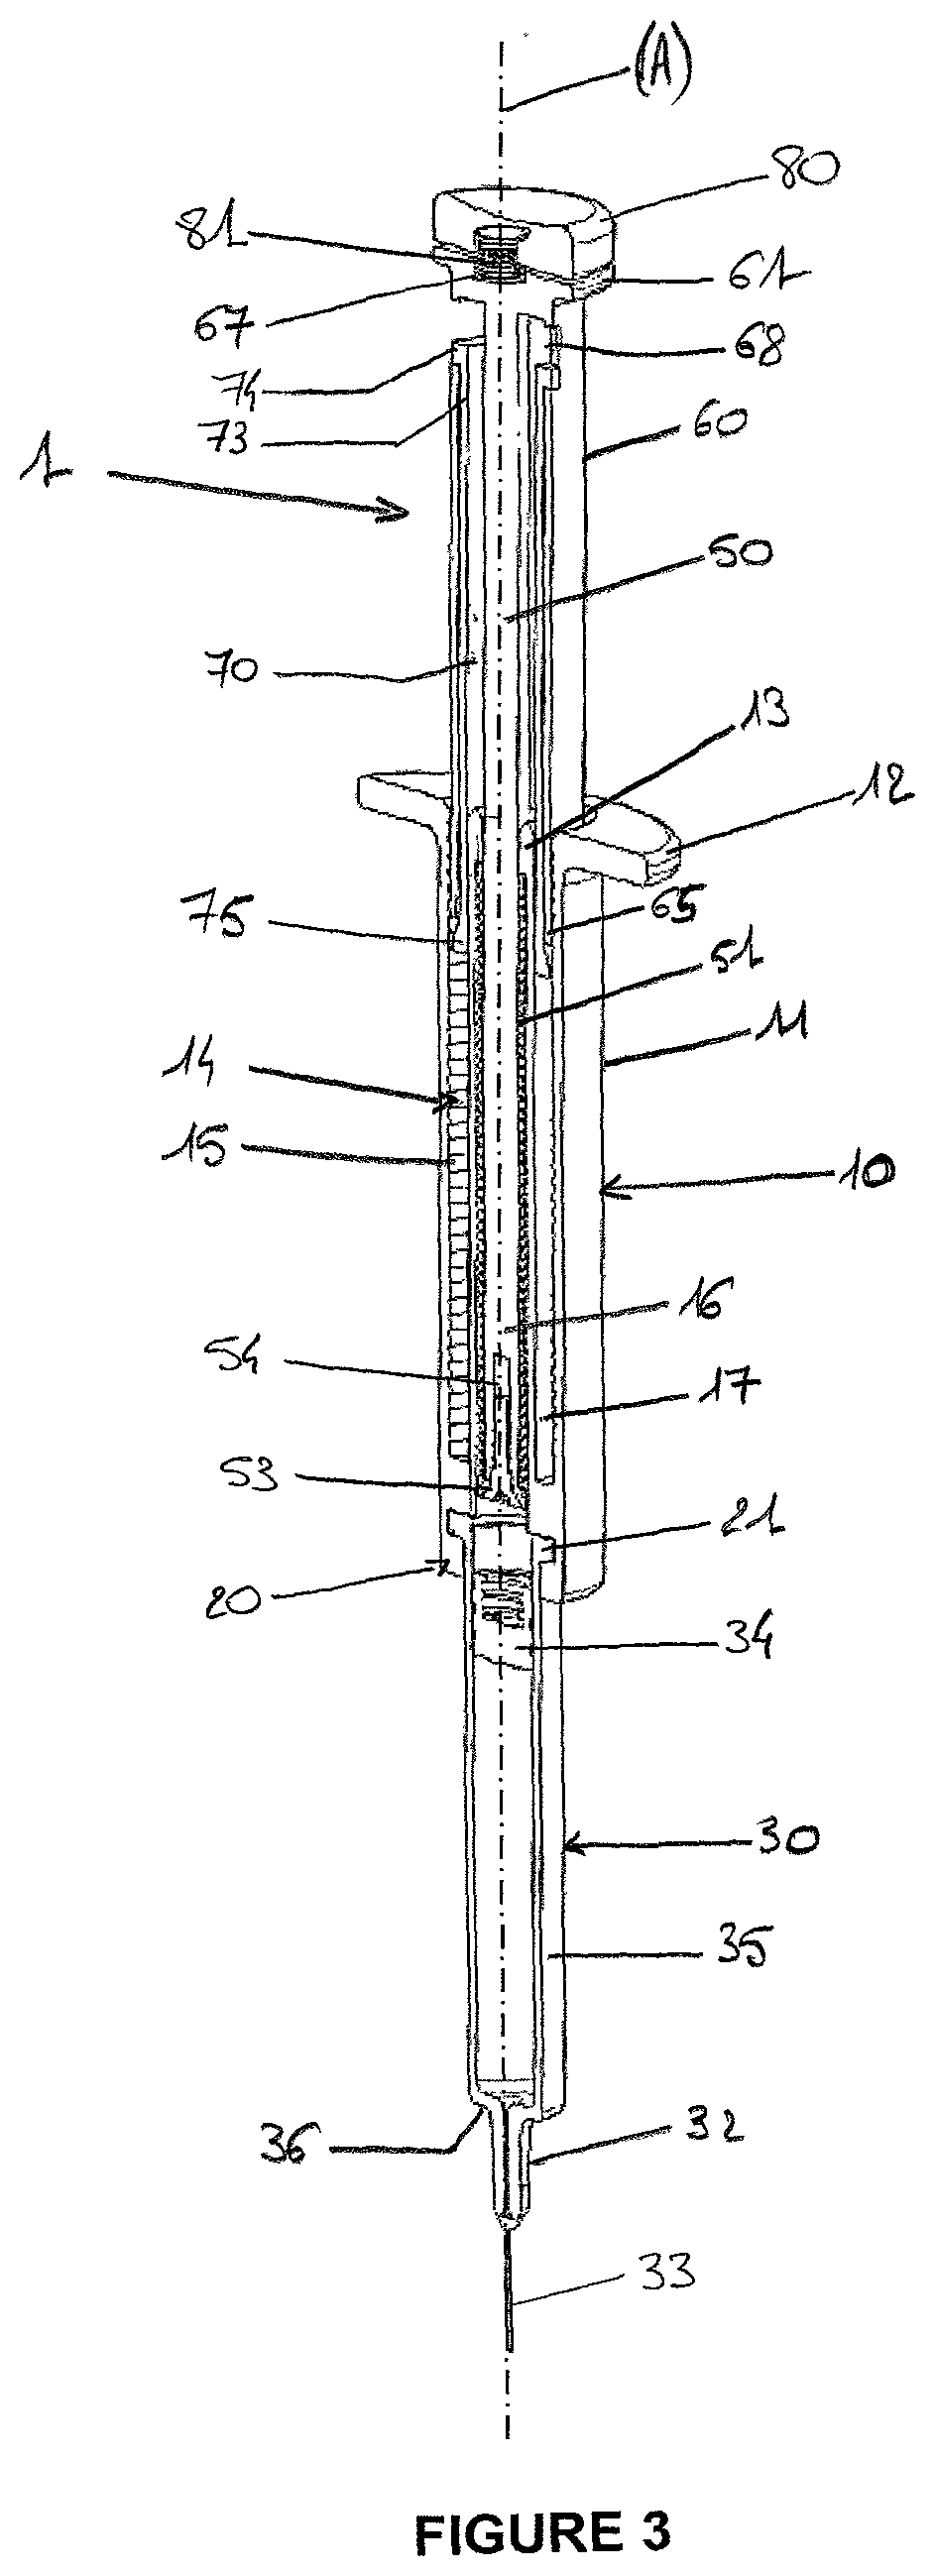 Assisted Injection Device for Selectively Injecting a Composition Contained in a Medical Container